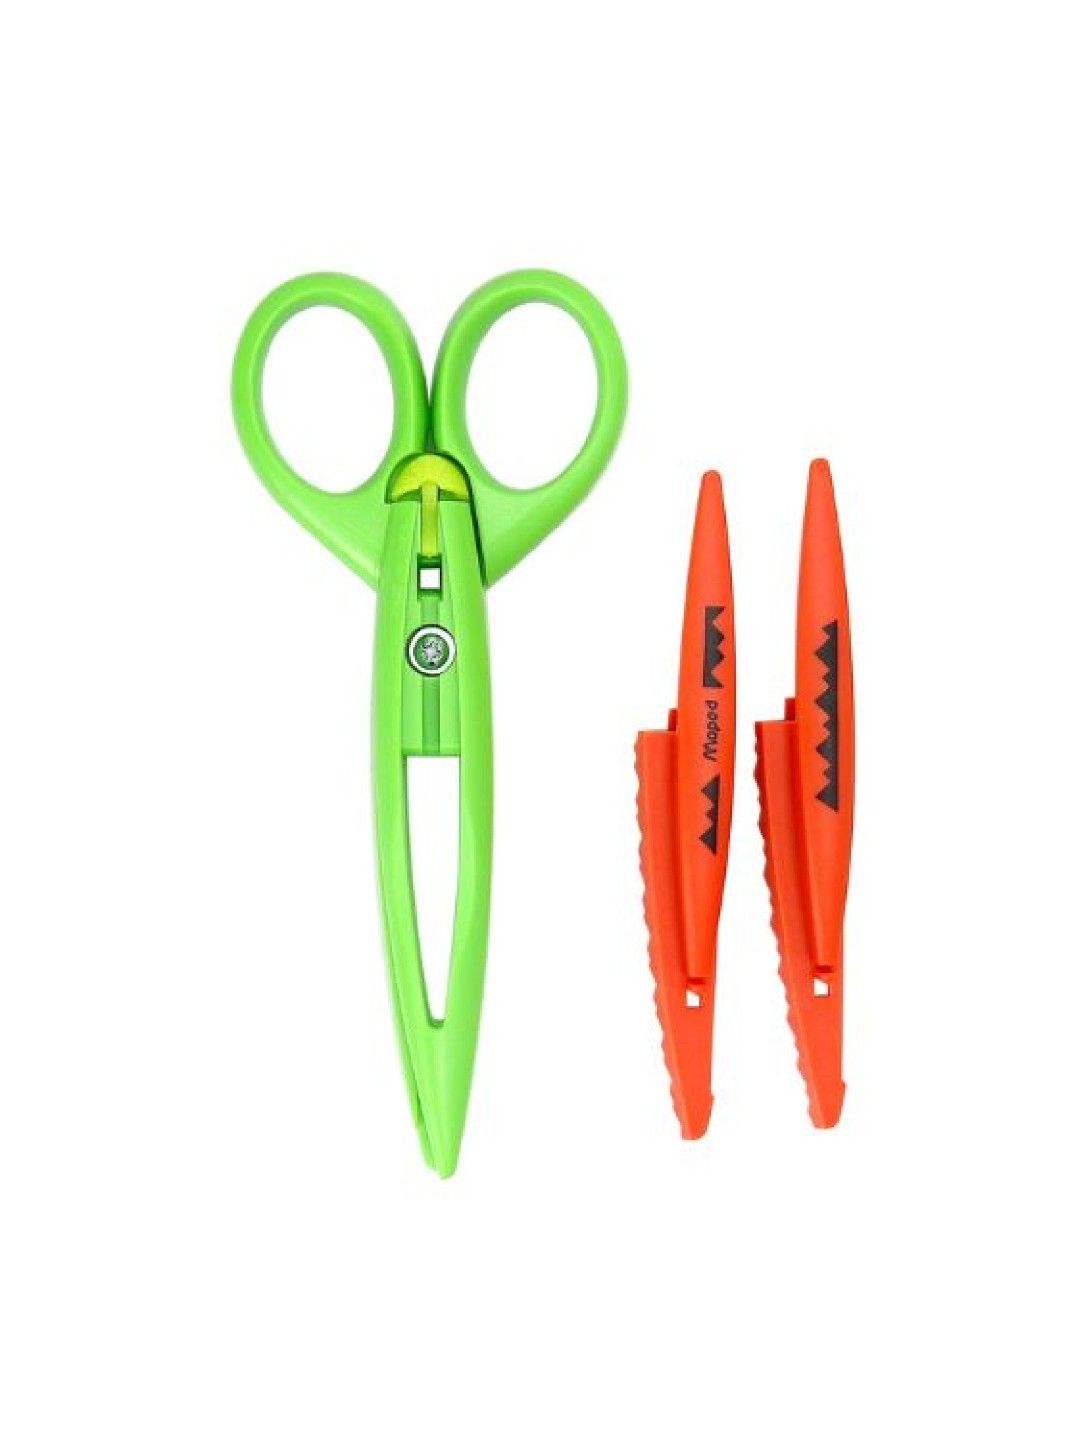 Maped Creacut Craft Scissors in Blister Pack - (Set of 5)